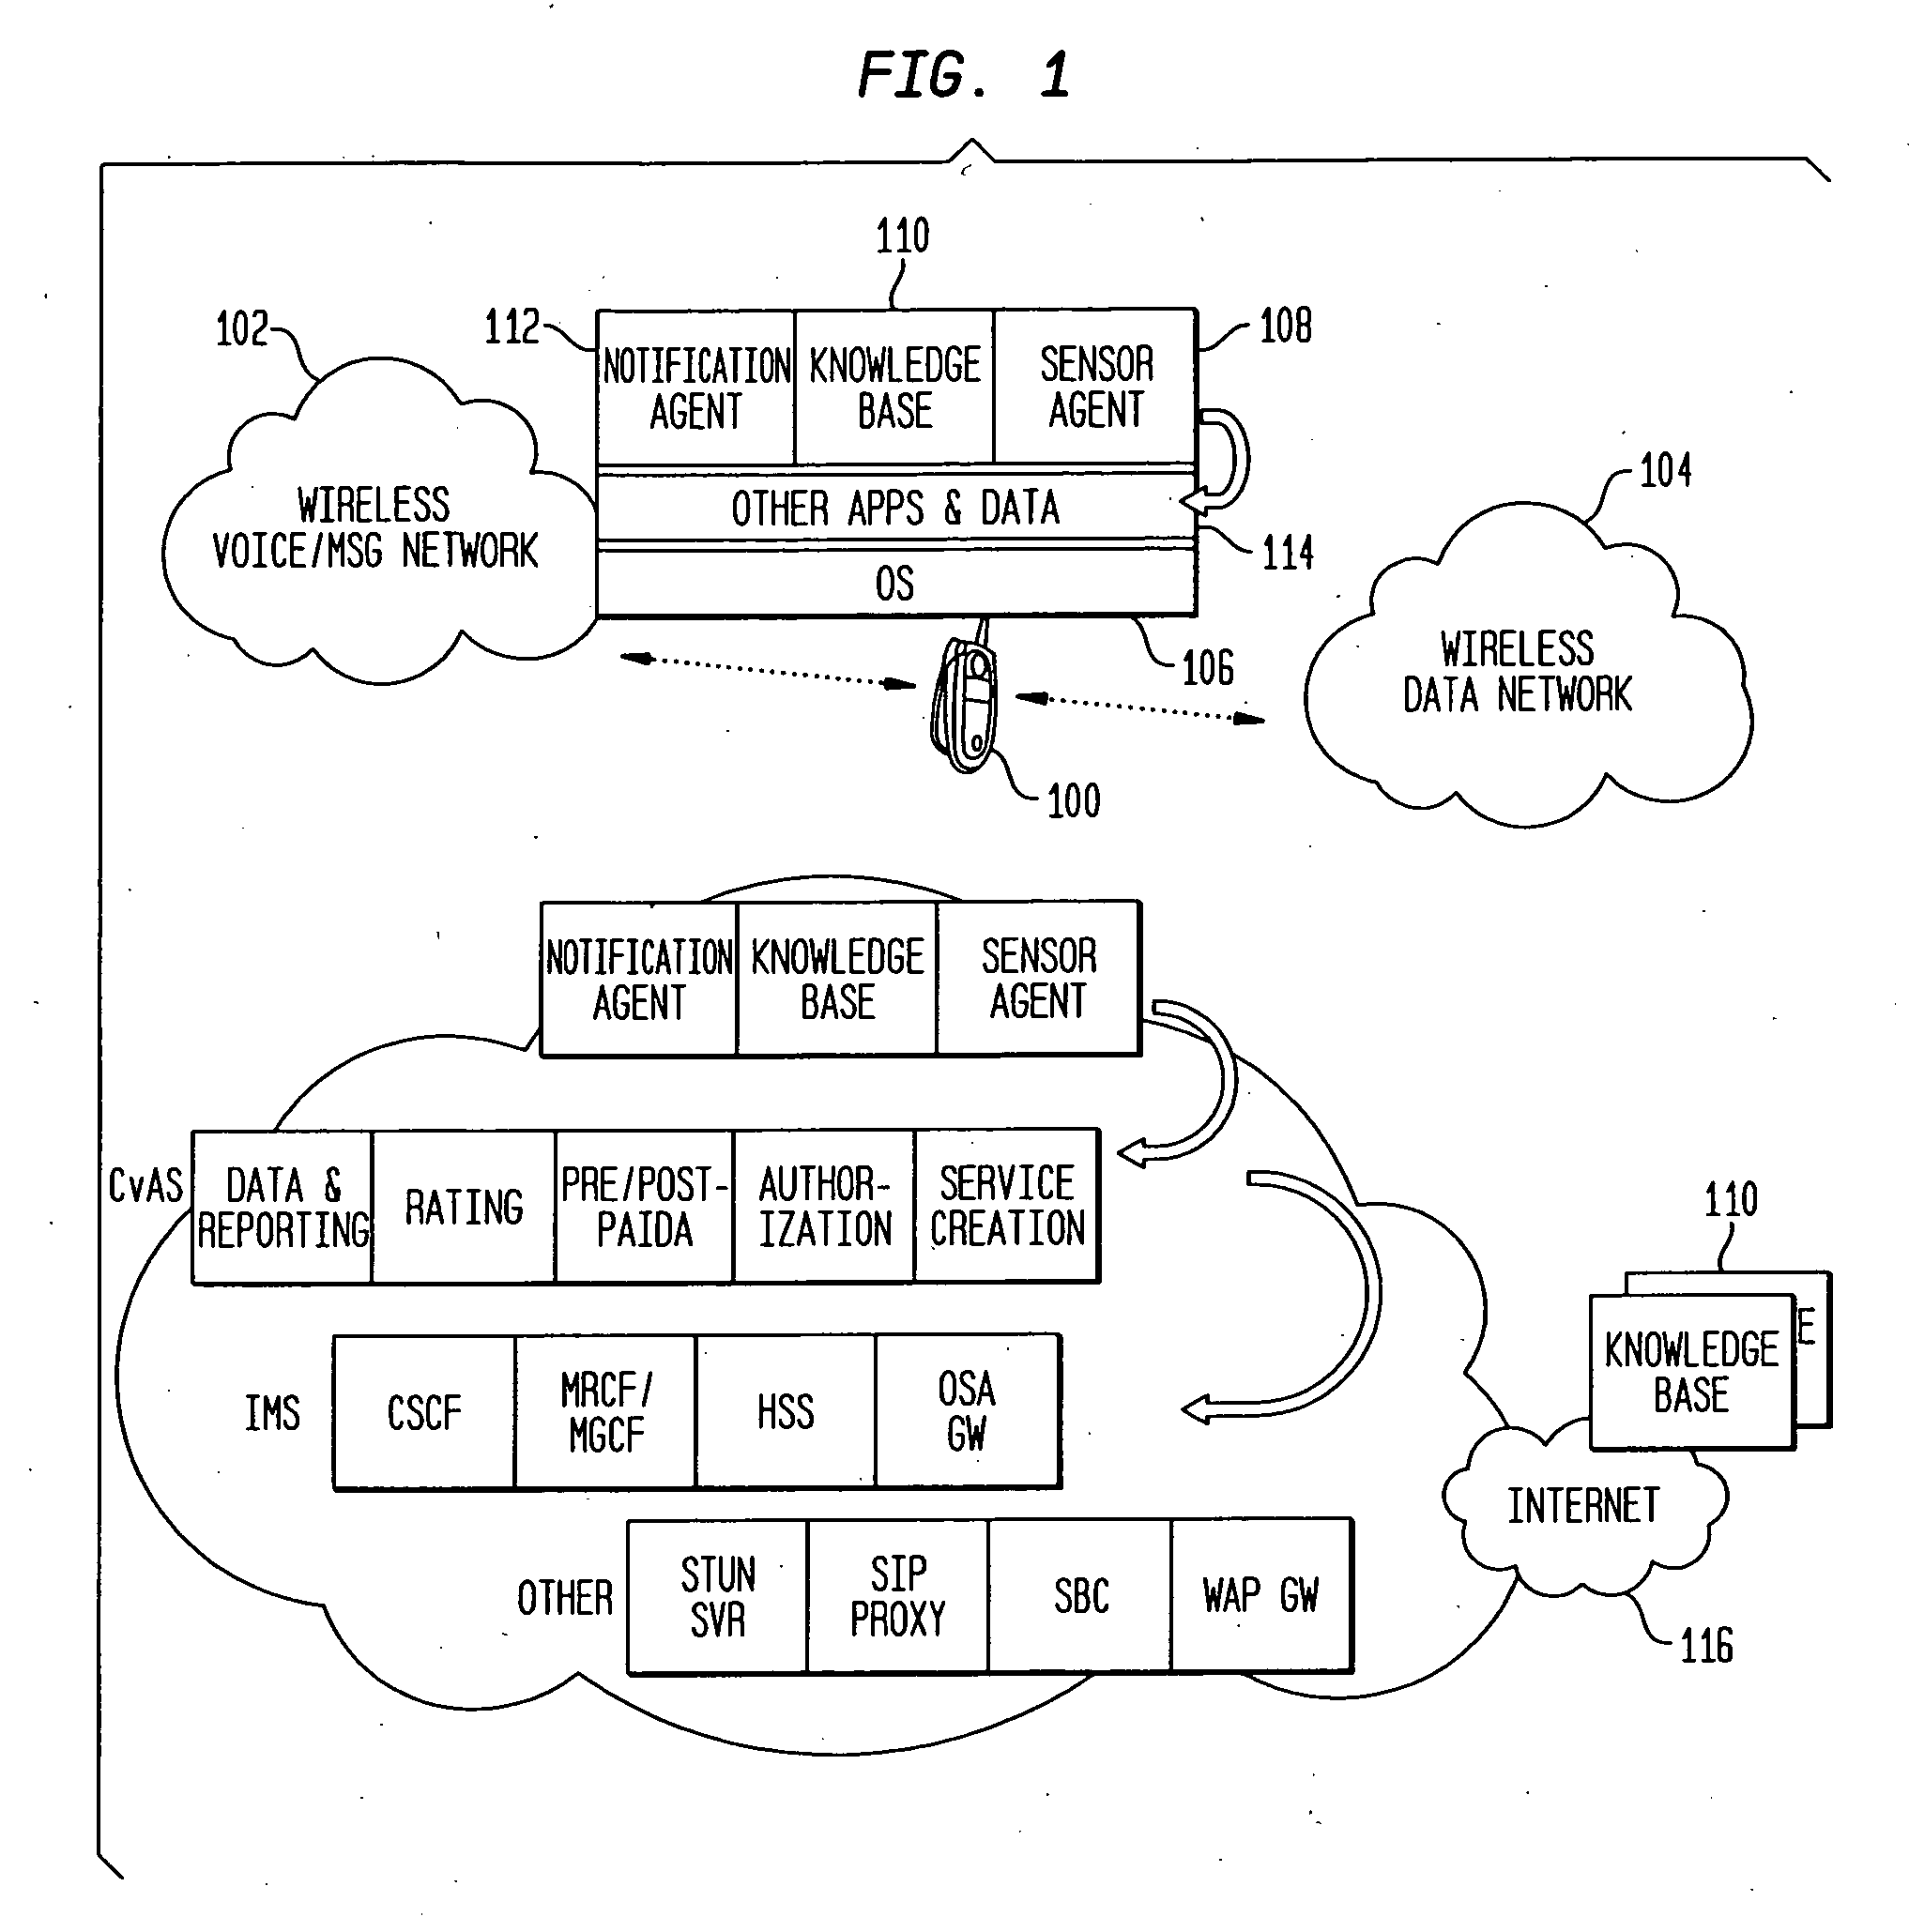 Method and System for Improving Wireless Customer Experience by Anticipating and Explaining Communication Quality Problems Through Notifications